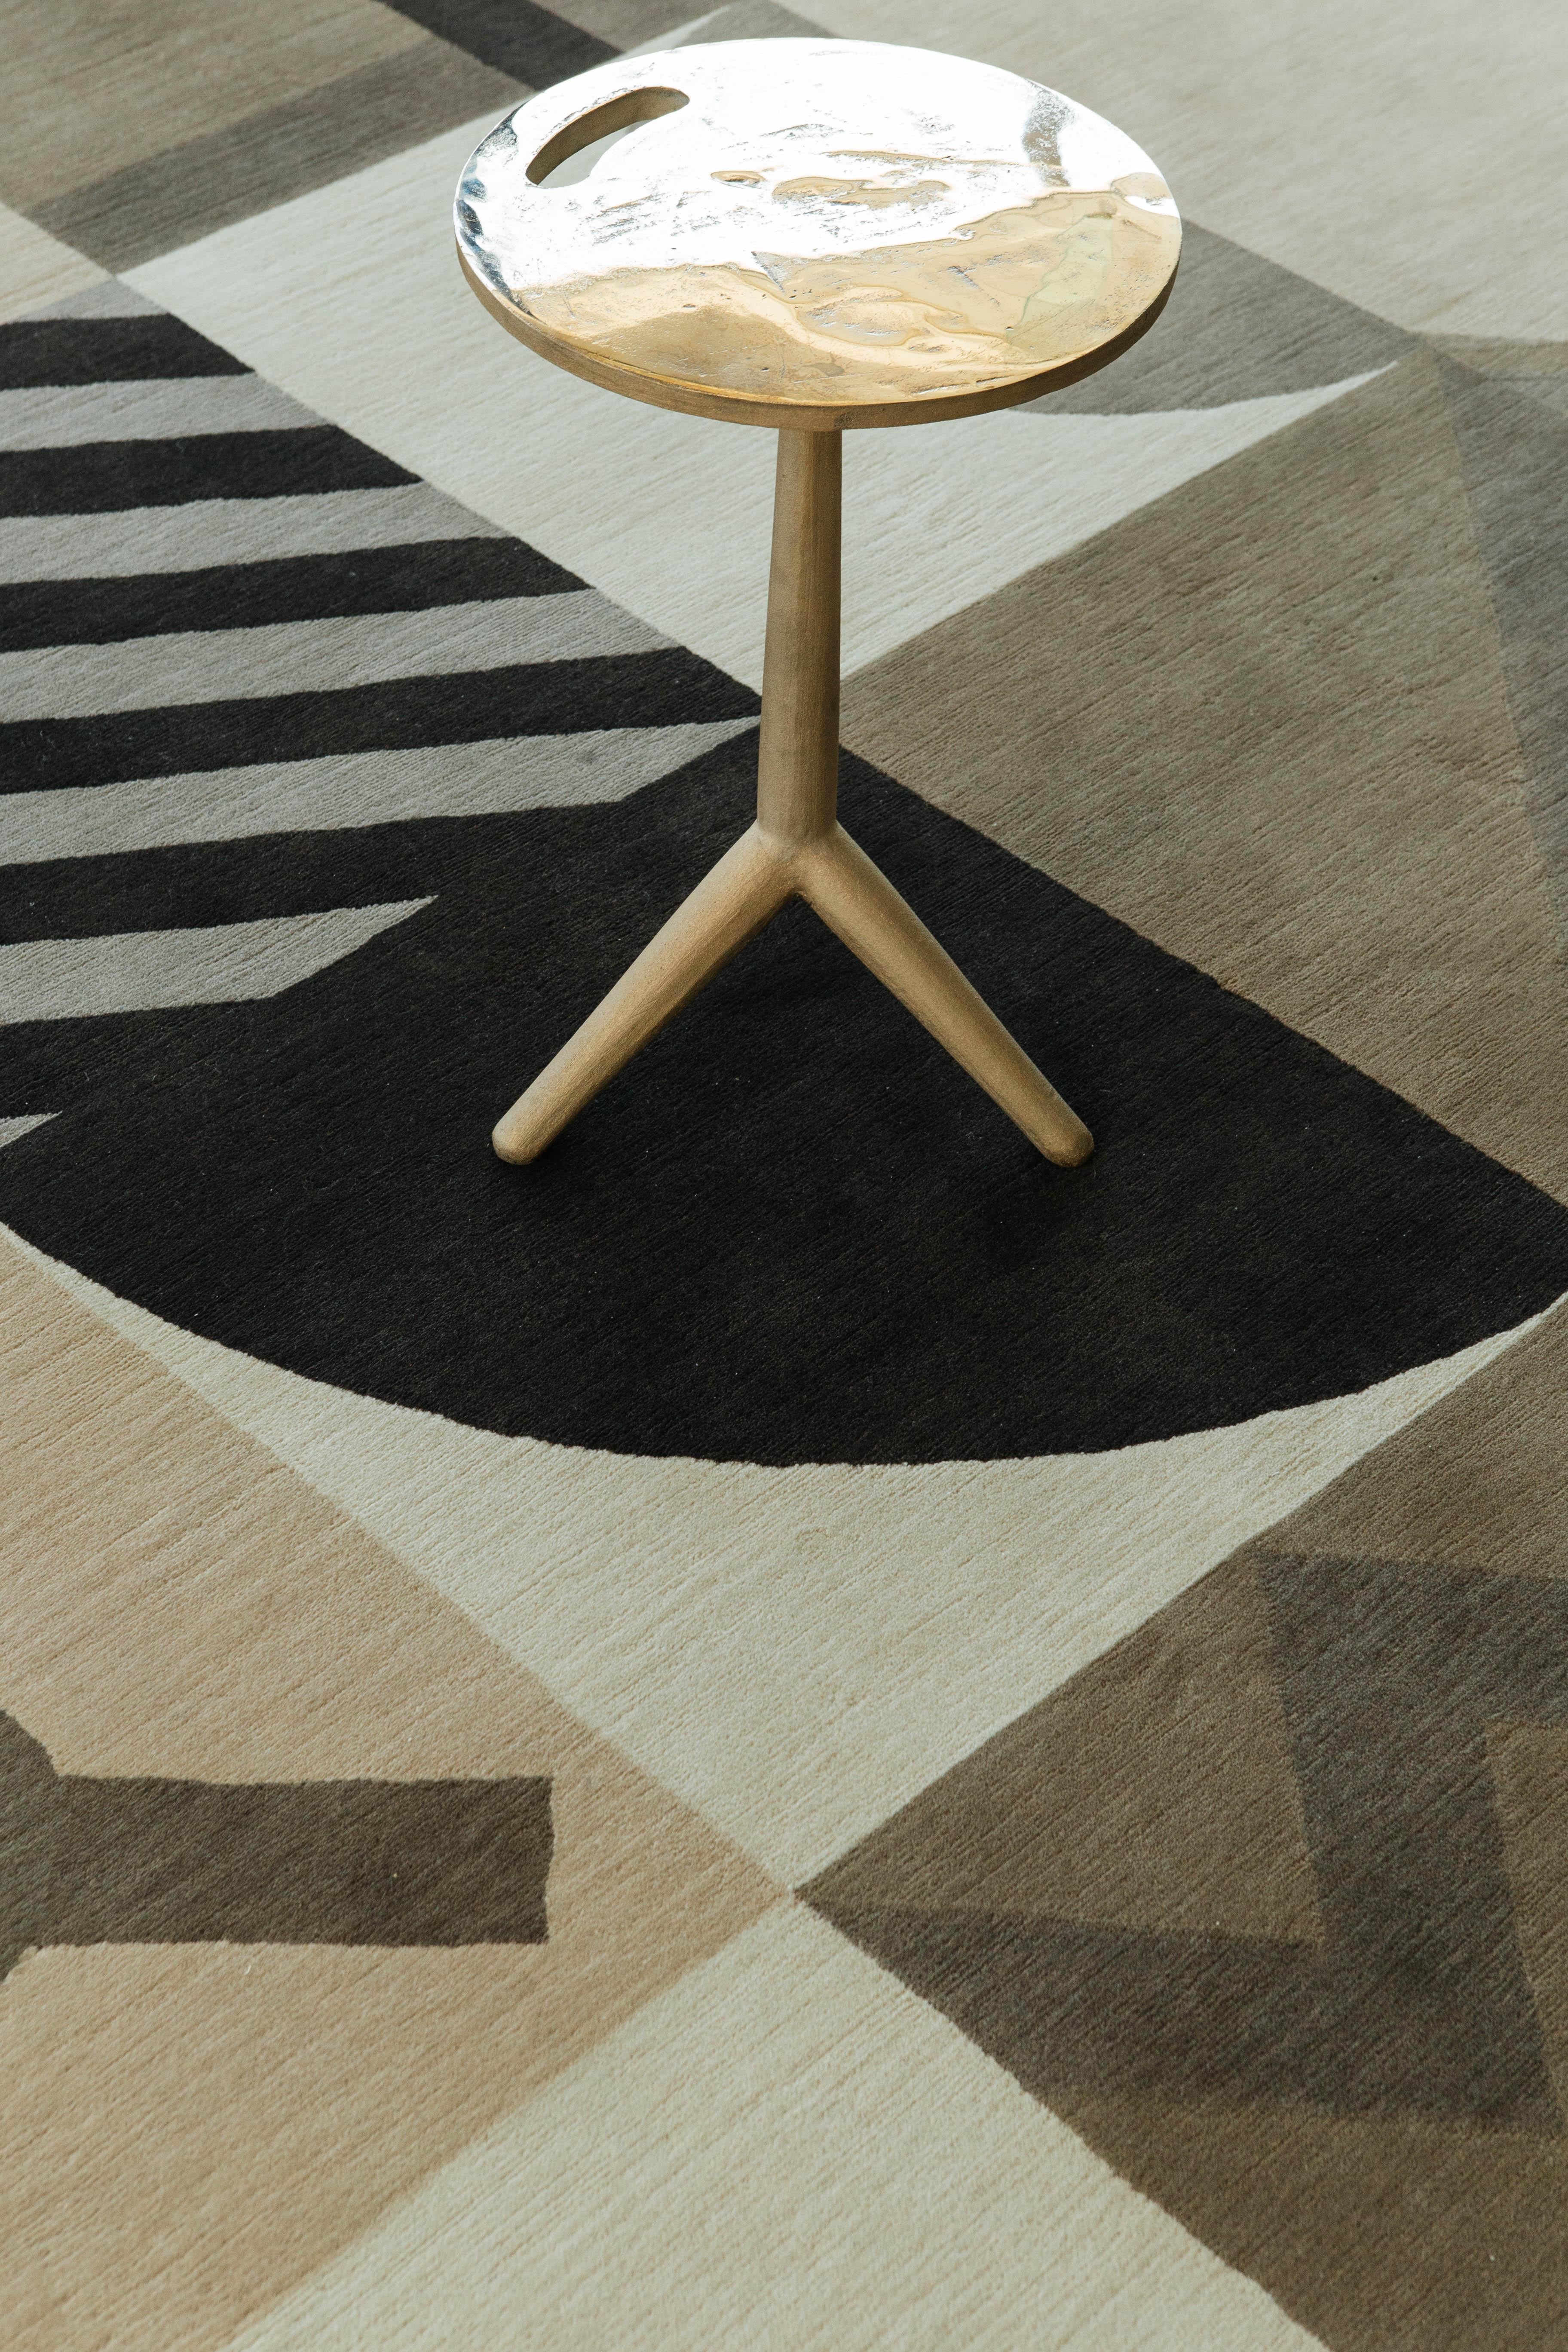 'Pazzo' is an interpretation of an Italian Bauhaus pattern. Sensuous, honest, and crazy in the best possible way. Handwoven of luxurious wool.

The Baci collection by Form Design Studio.


Rug number: 28384
Size: 9'1